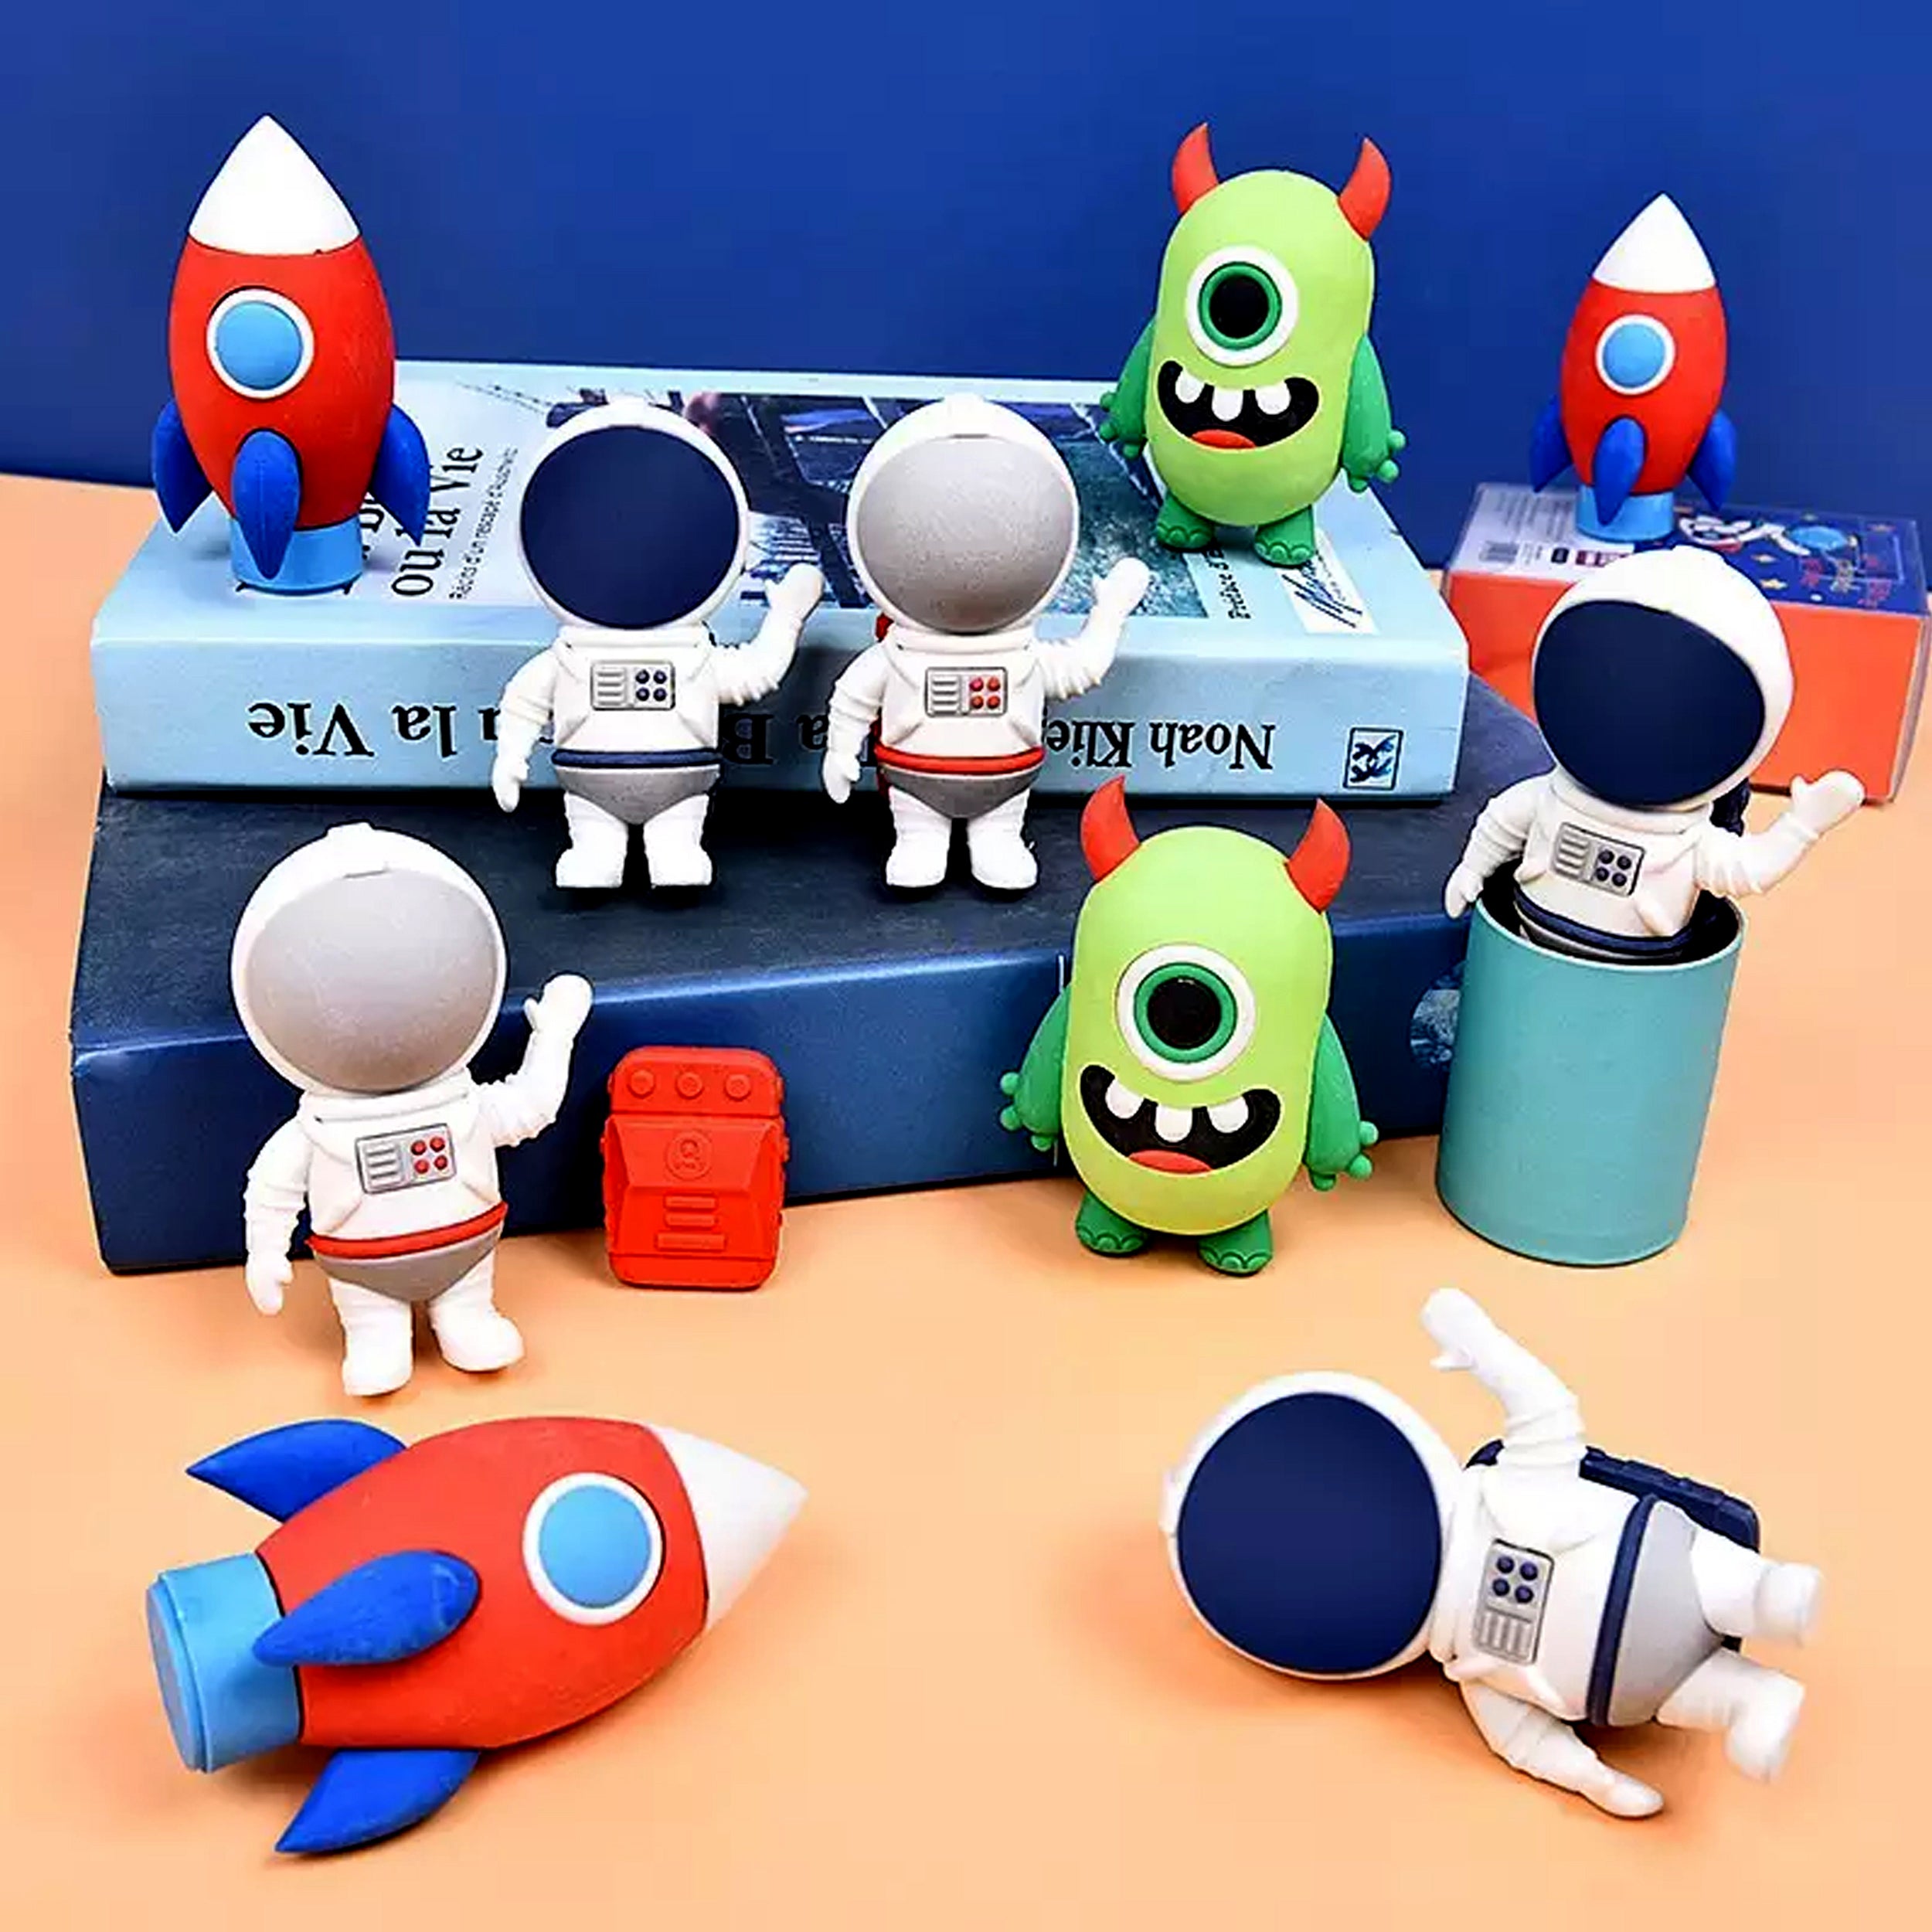 Jumbo Cartoon Space Erasers for Kids Fun and Colorful School Supplies